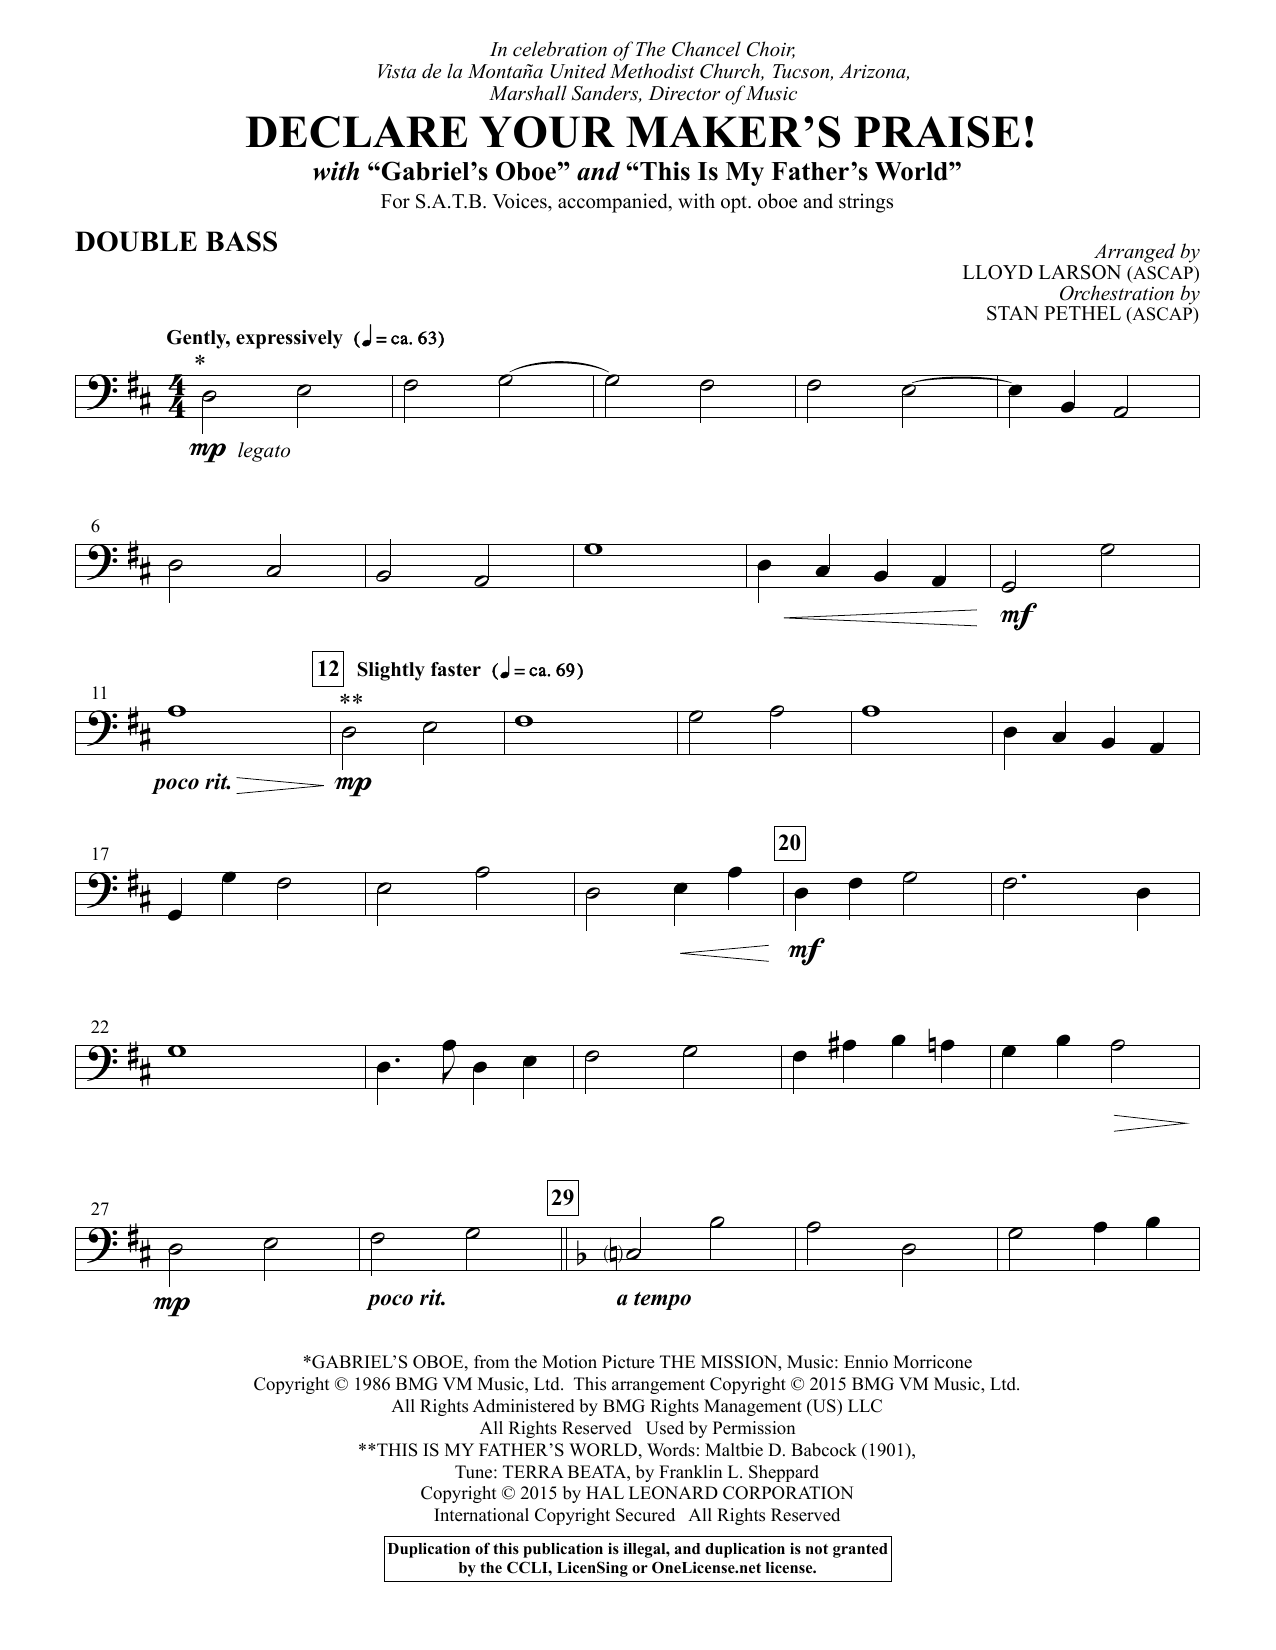 Lloyd Larson Declare Your Maker's Praise! - Double Bass sheet music notes and chords. Download Printable PDF.